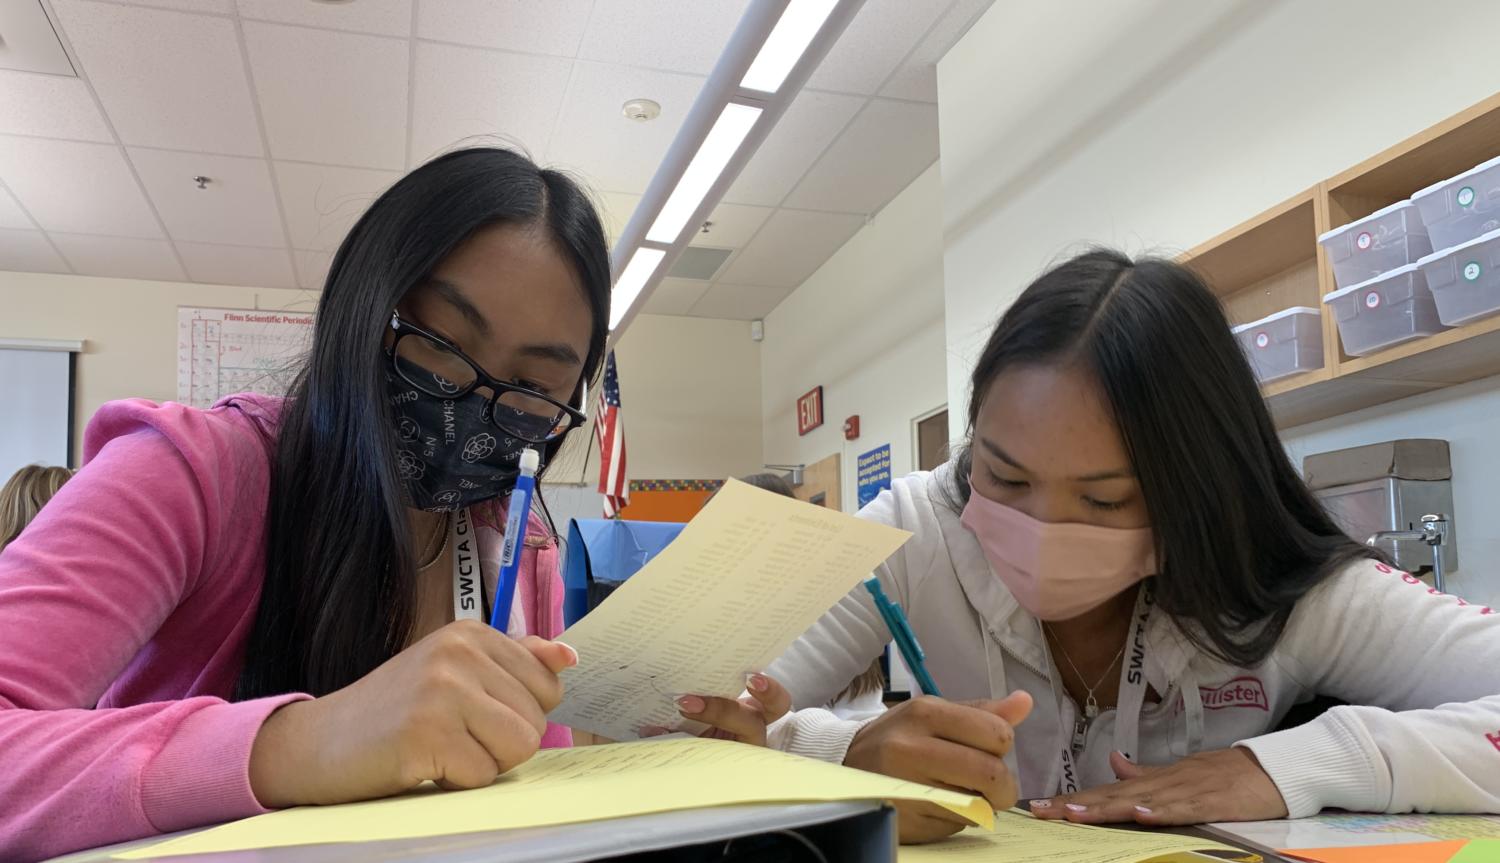 Hard at work, sophomores Angelynne Tiangco and Kelliya Kedora help each other finish their assignment. Students collaborated together during their Chemistry Honors class to complete their ionic compounds worksheet. “I’m very happy to say that my grades are doing very well this quarter and I hope that it stays like that for the rest of my years in school,” Tiangco said. “I’ve been really bad about keeping myself organized and staying on top of things, that I’ve gotten into the habit of doing things last minute, as well as getting distracted very easily. While I’m doing very well in my classes, the process behind it has been the opposite.”  Photo Credit: Crystalyn Estabillo